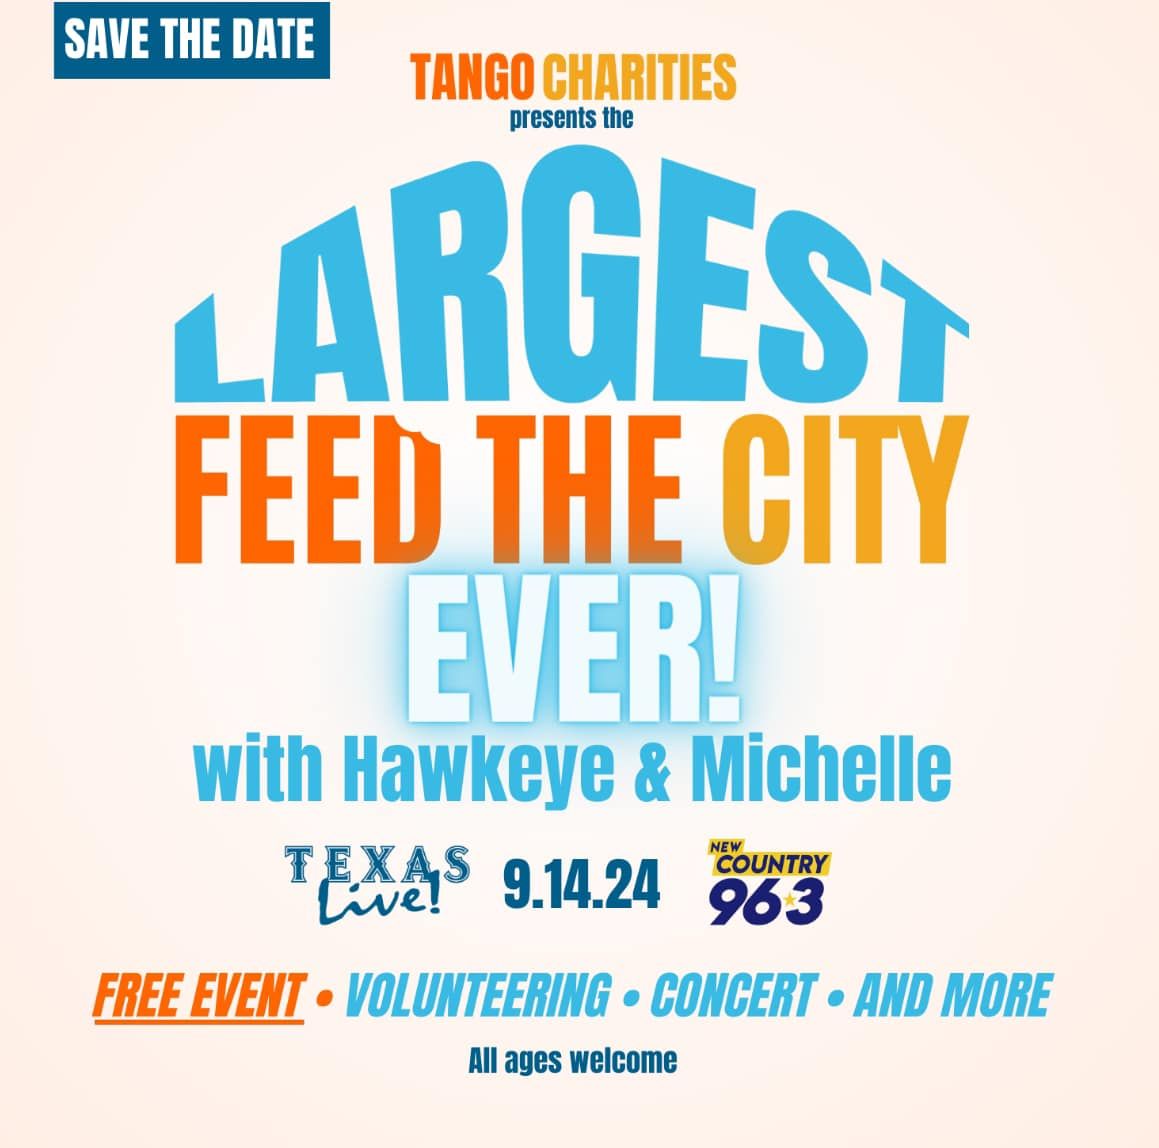 Largest Feed The City Ever!